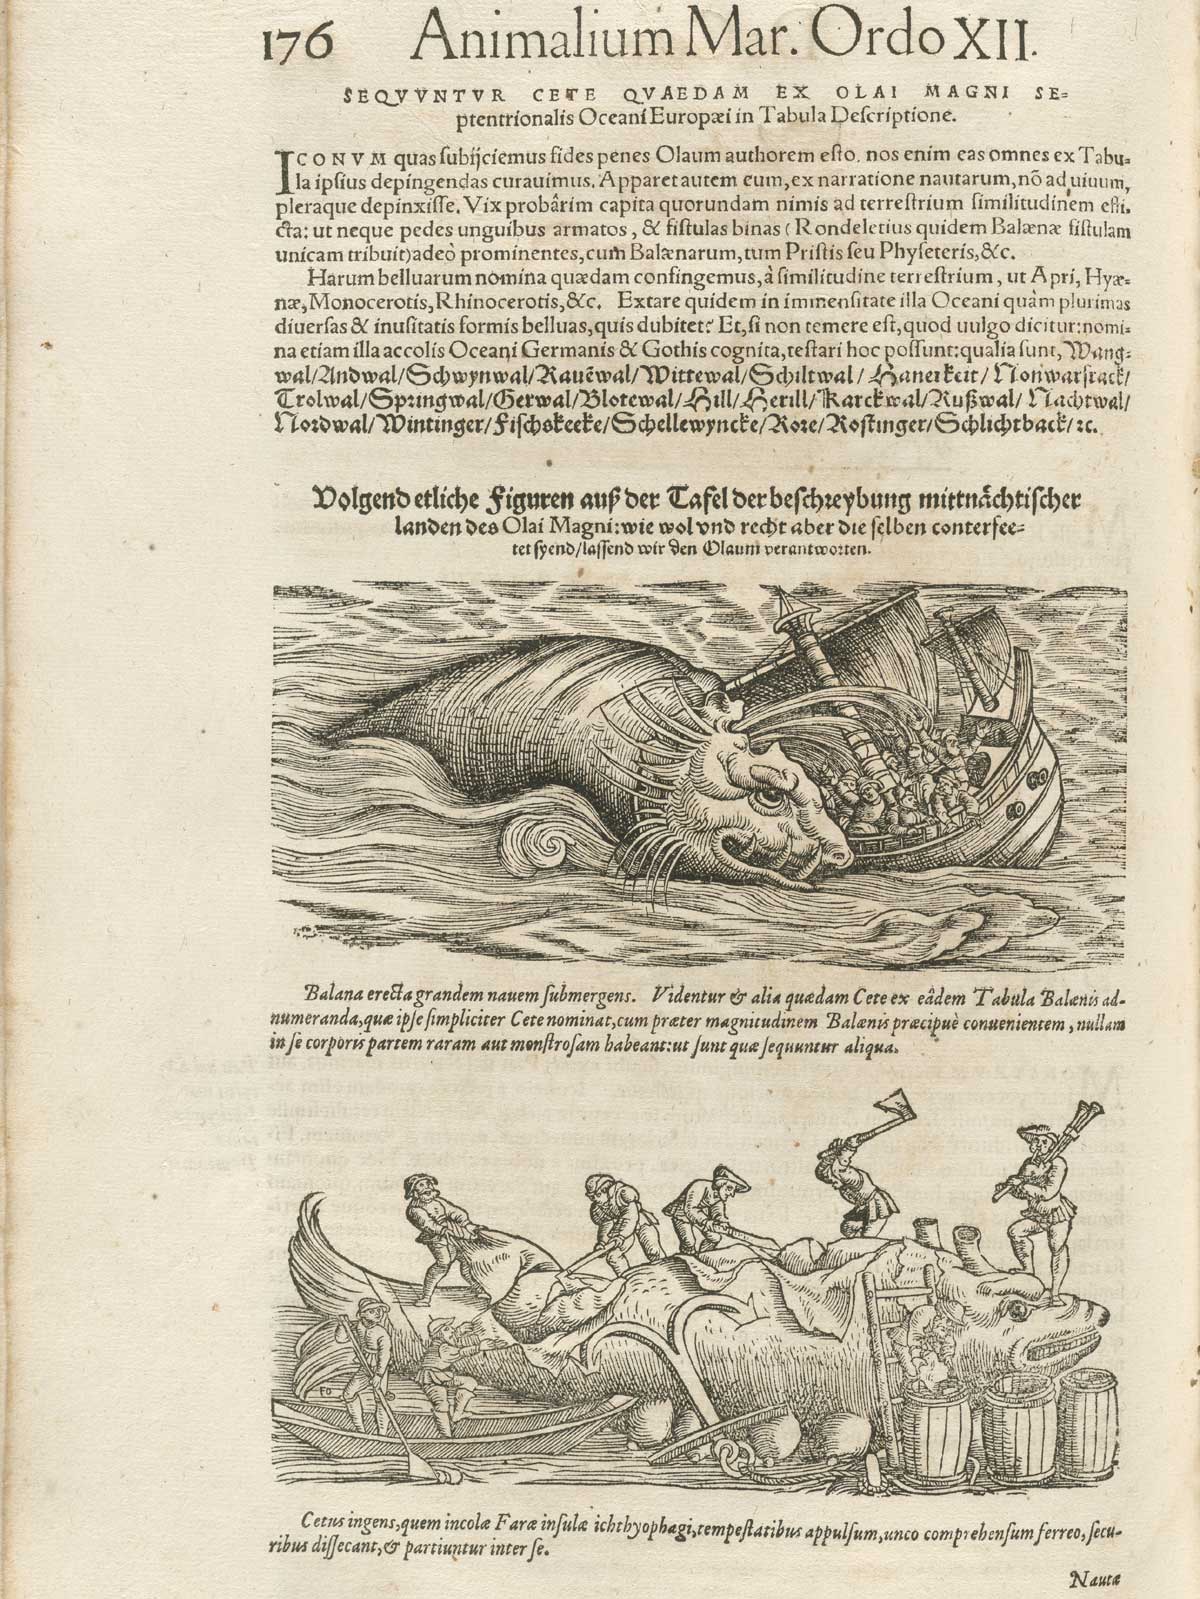 Page 176 from volume 4 of Conrad Gessner's Conradi Gesneri medici Tigurini Historiae animalium, featuring two images of whales. The top image is the whale attacking a ship full of men and the bottom image is the image of men chopping up a whale with axes and knives.